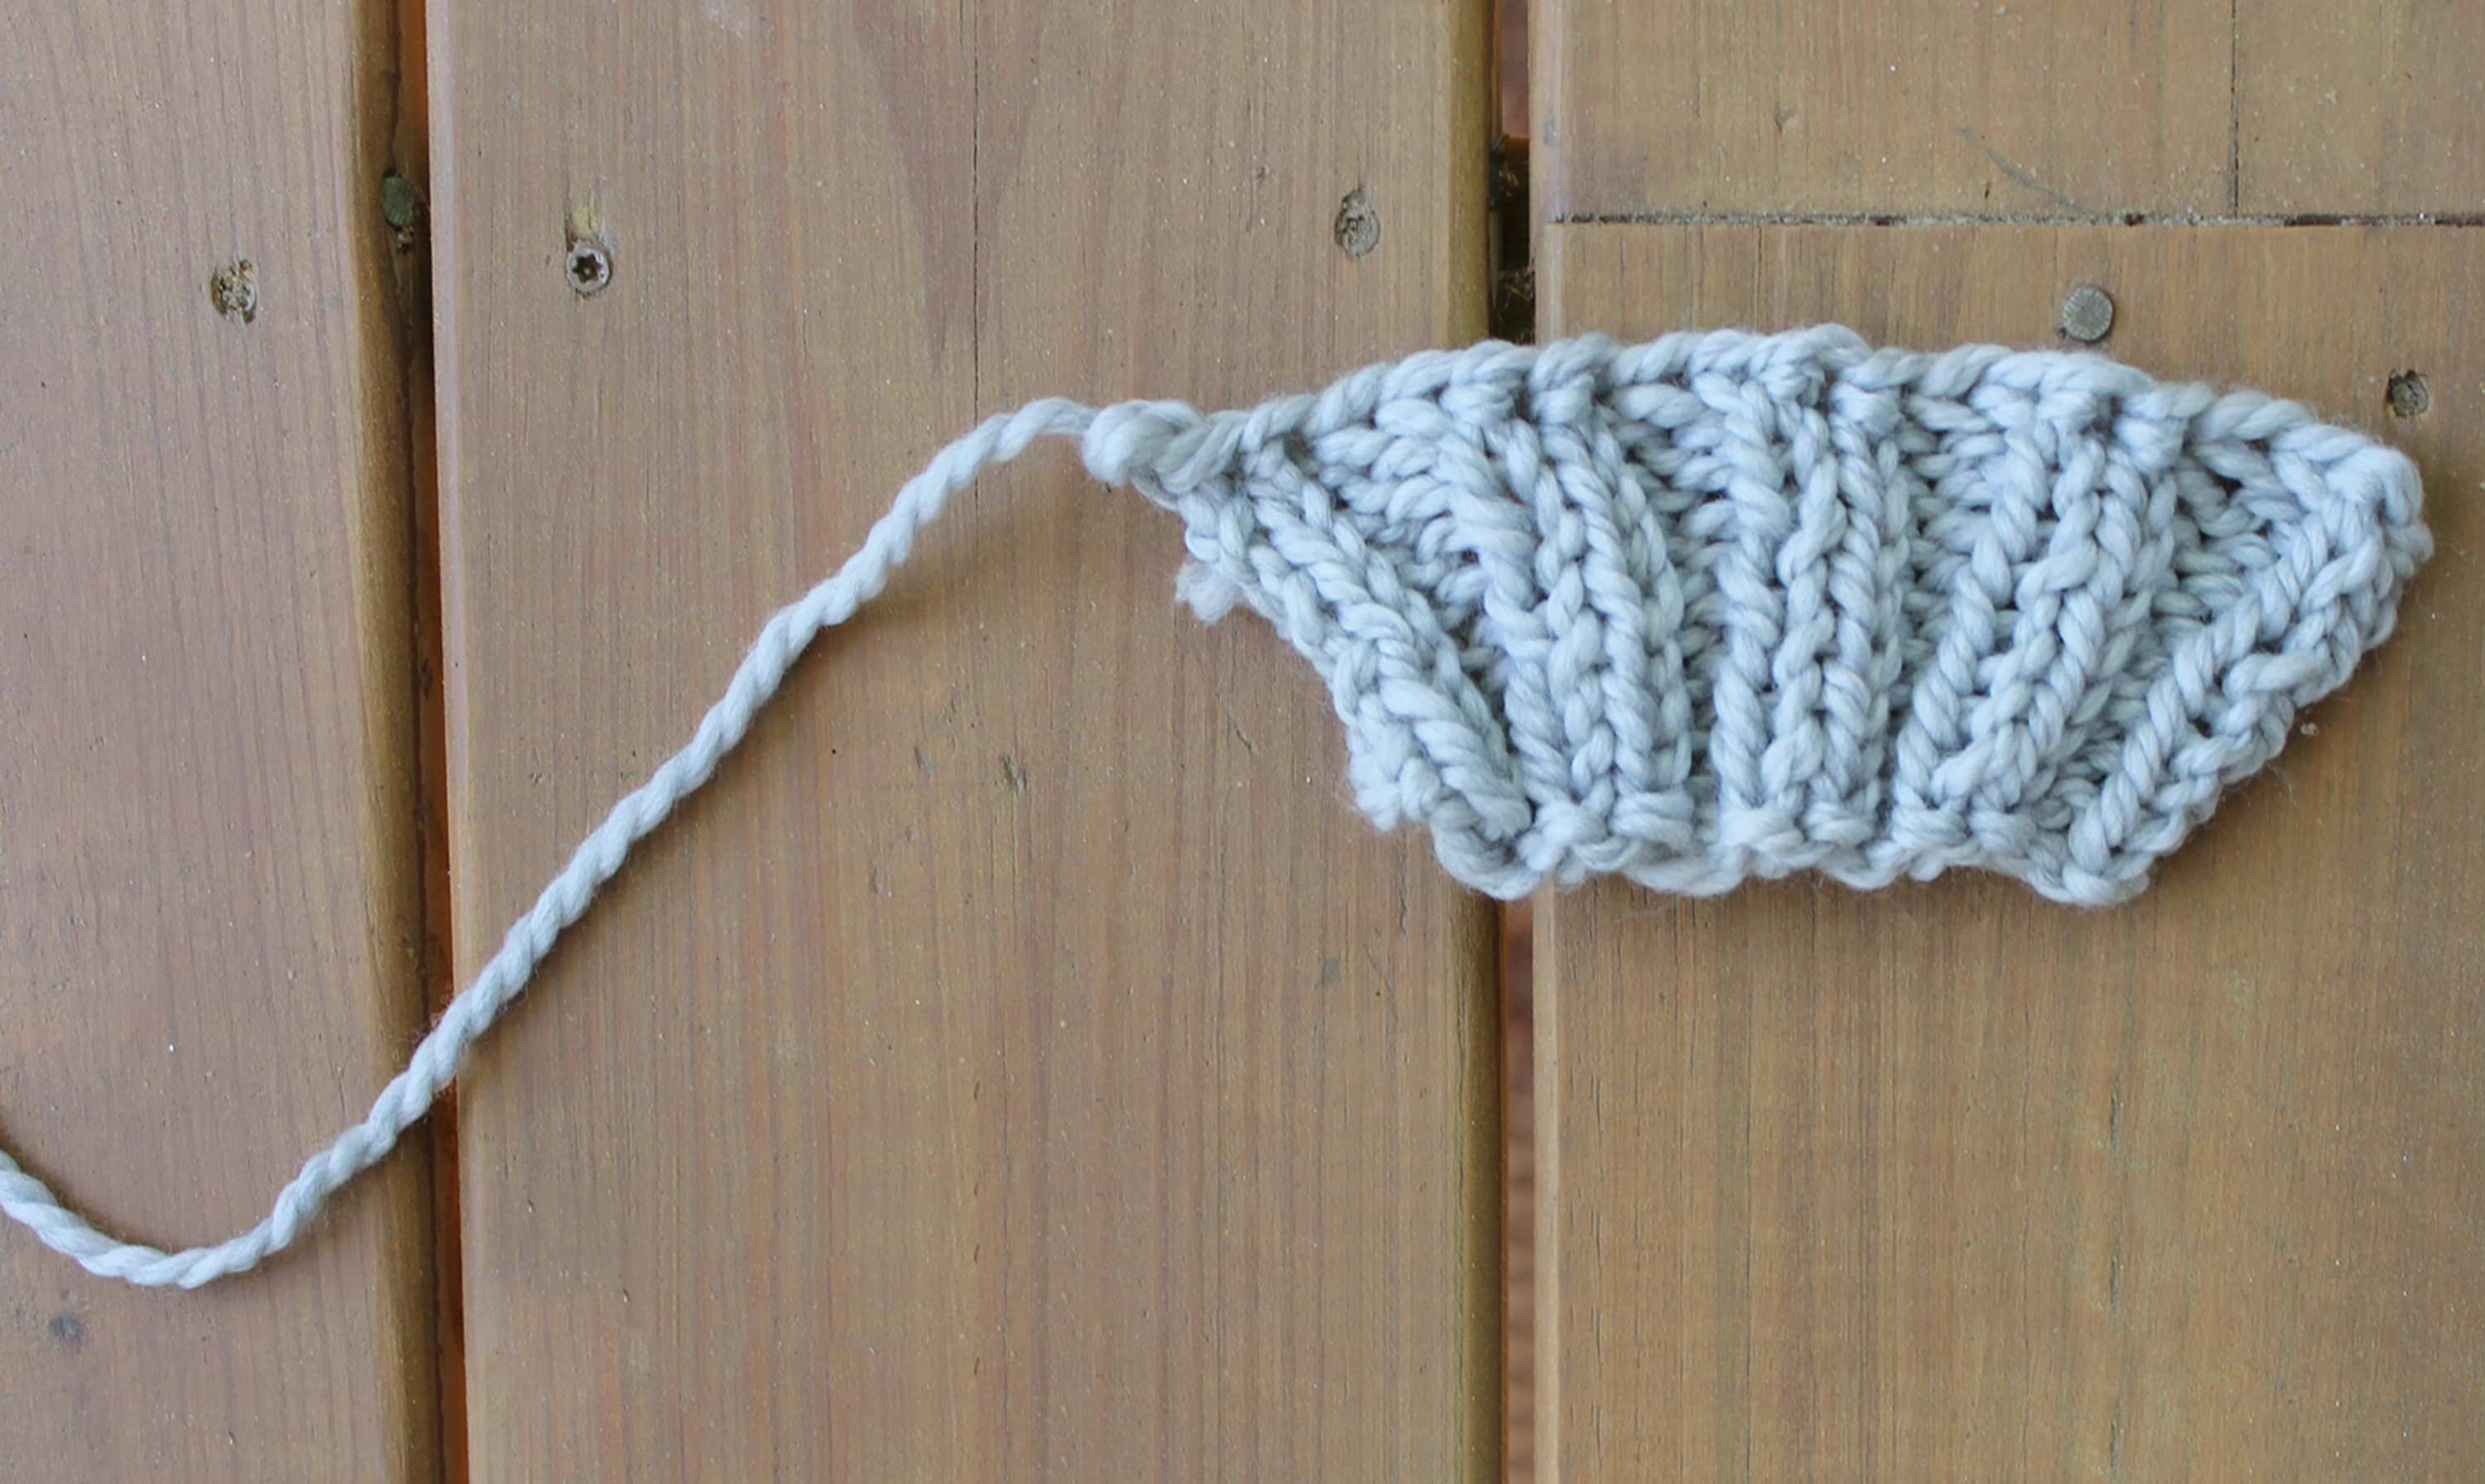 How to Bind Off Knitting on a Circular Needle « Knitting & Crochet